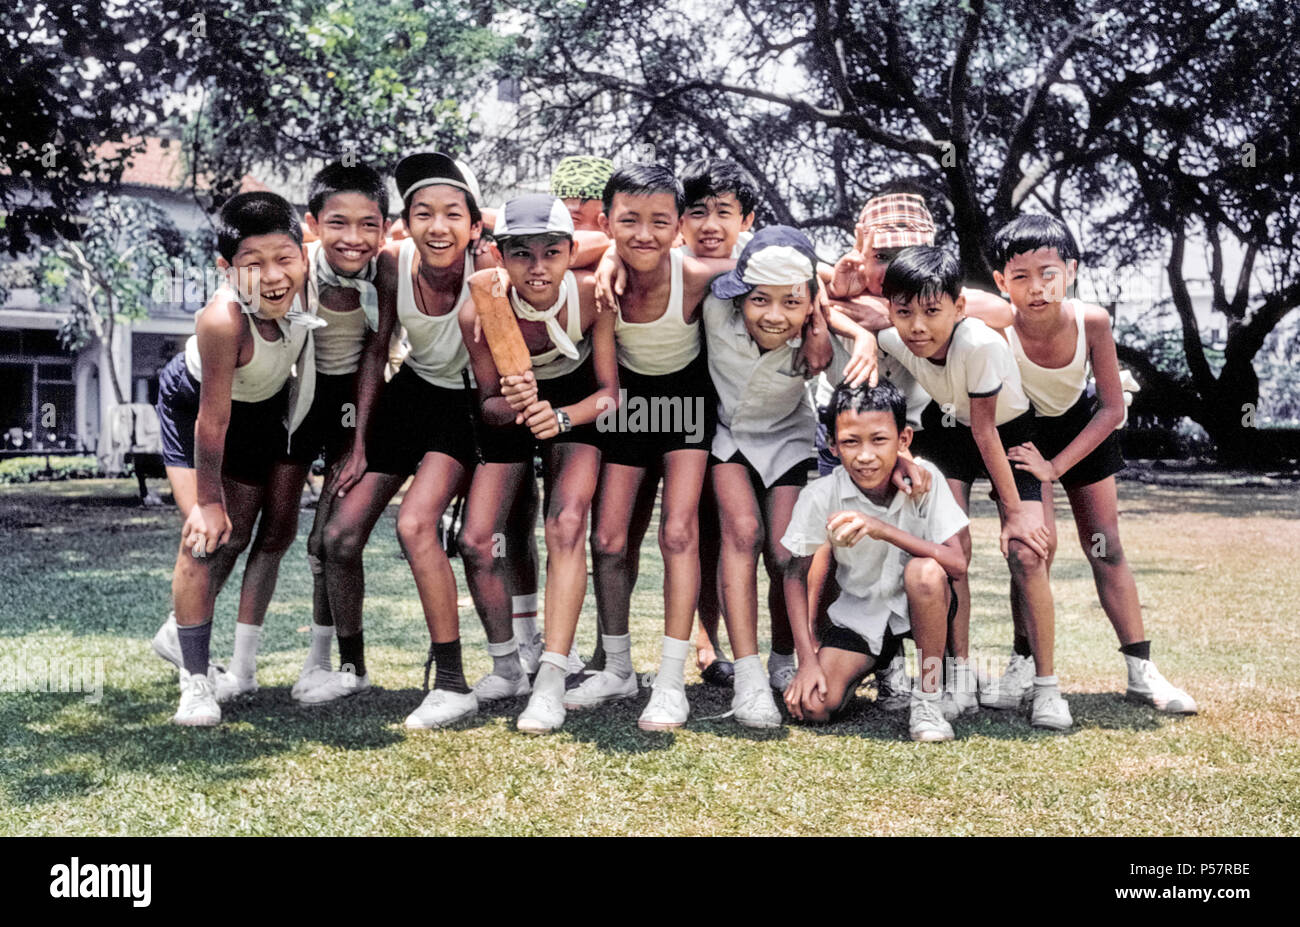 Twelve young schoolboys take a break from playing games to pose for a group photo in Singapore, a multiracial and multicultural Southeast Asian country with ethnic Chinese, Indians, and Malays making up the majority of the population. Stock Photo